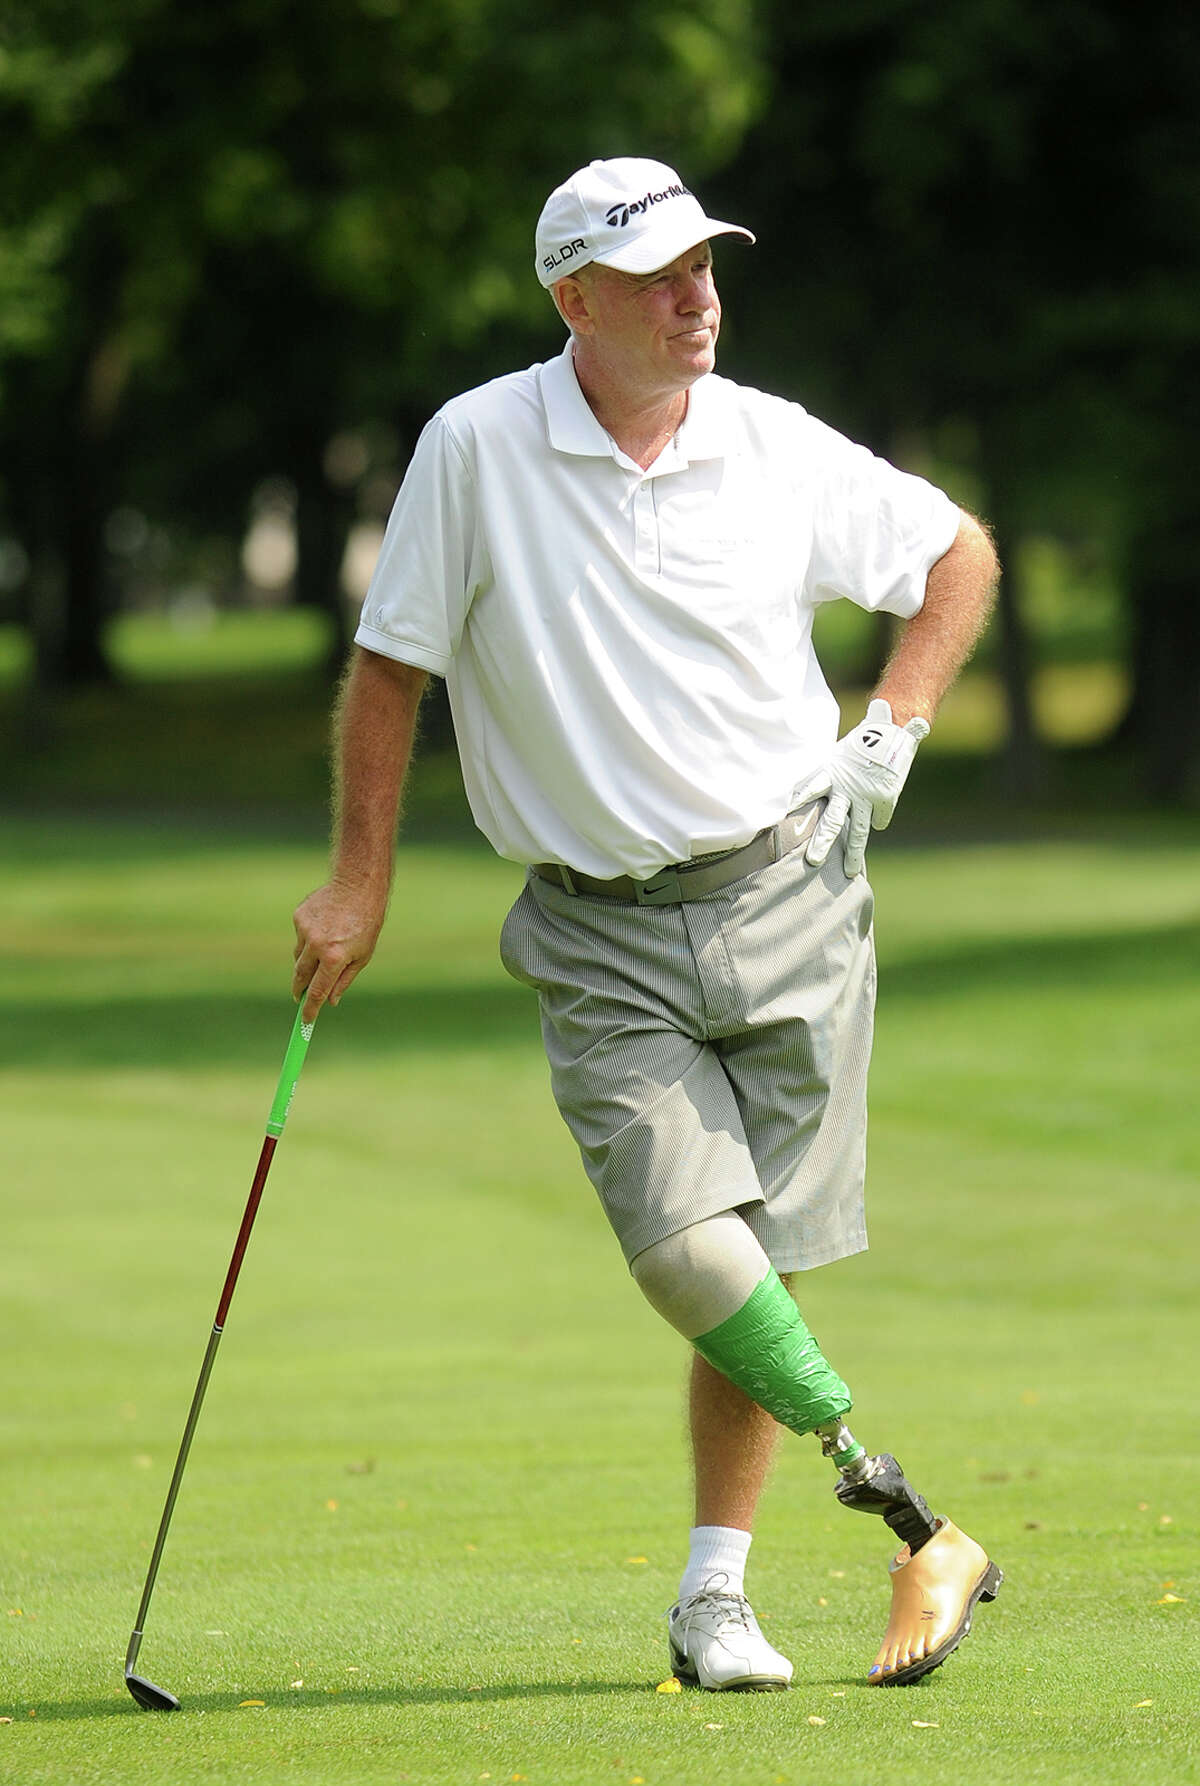 Golfer Ken Green, from the Ridgewood Country Club in Danbury, waits to hit his second shot on th 16th hole during the 80th Connecticut Open Championship golf tournament at Rolling Hills Country Club in Wilton, Conn. on Tuesday, July 29, 2014.